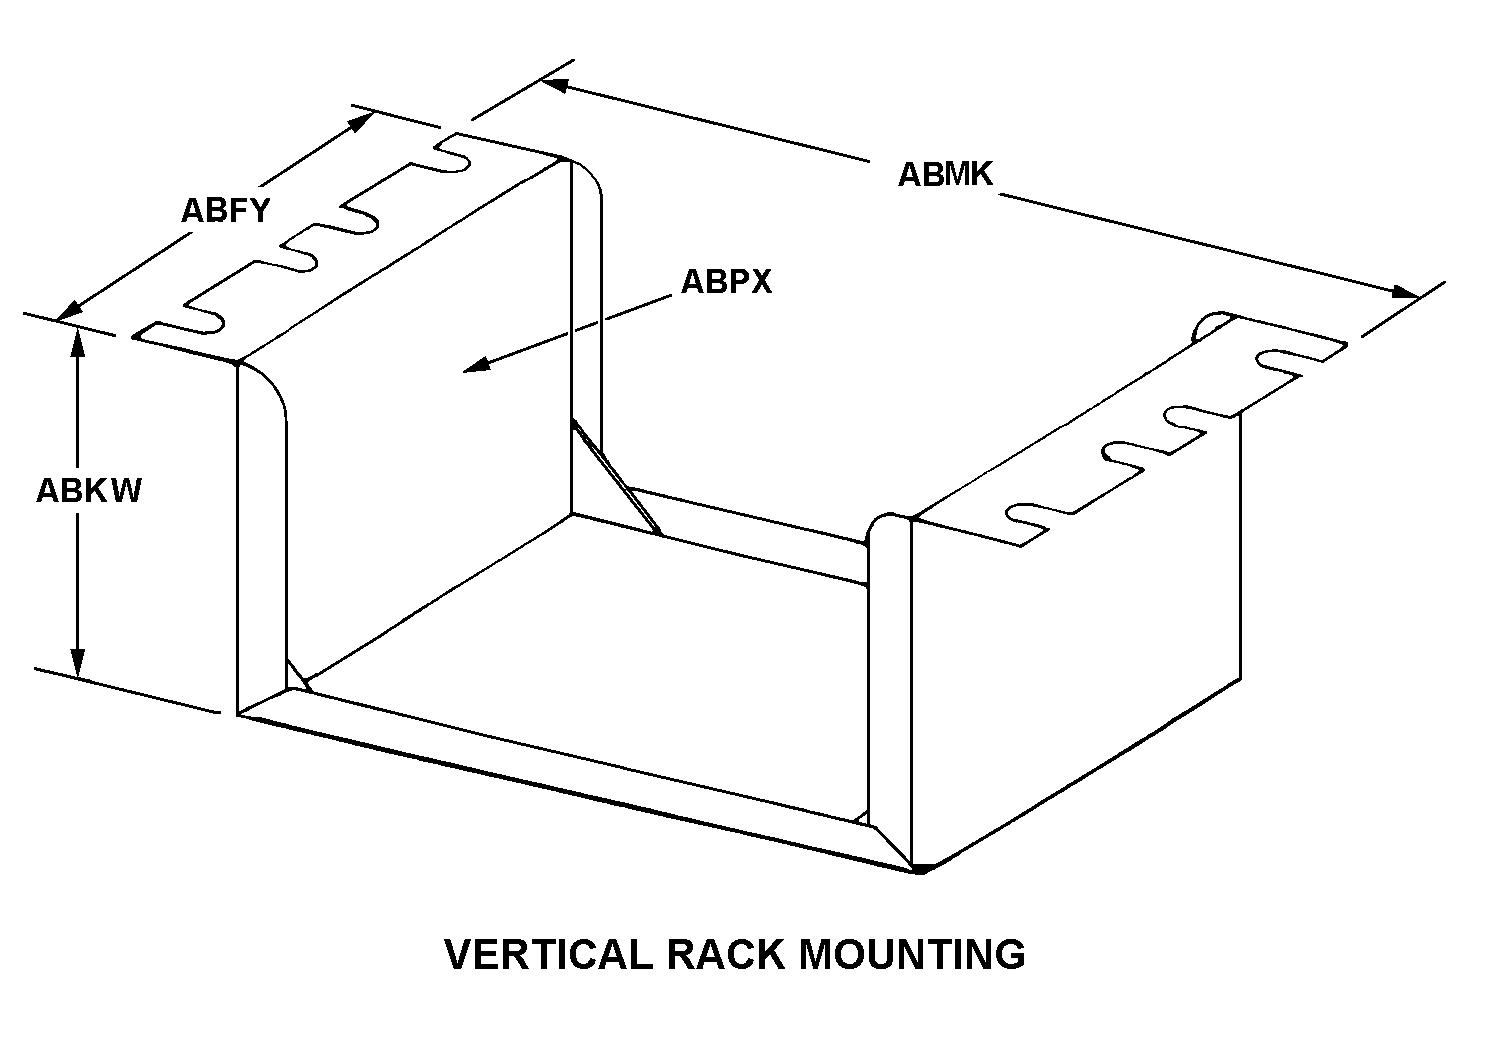 VERTICAL RACK MOUNTING style nsn 5975-01-281-6981